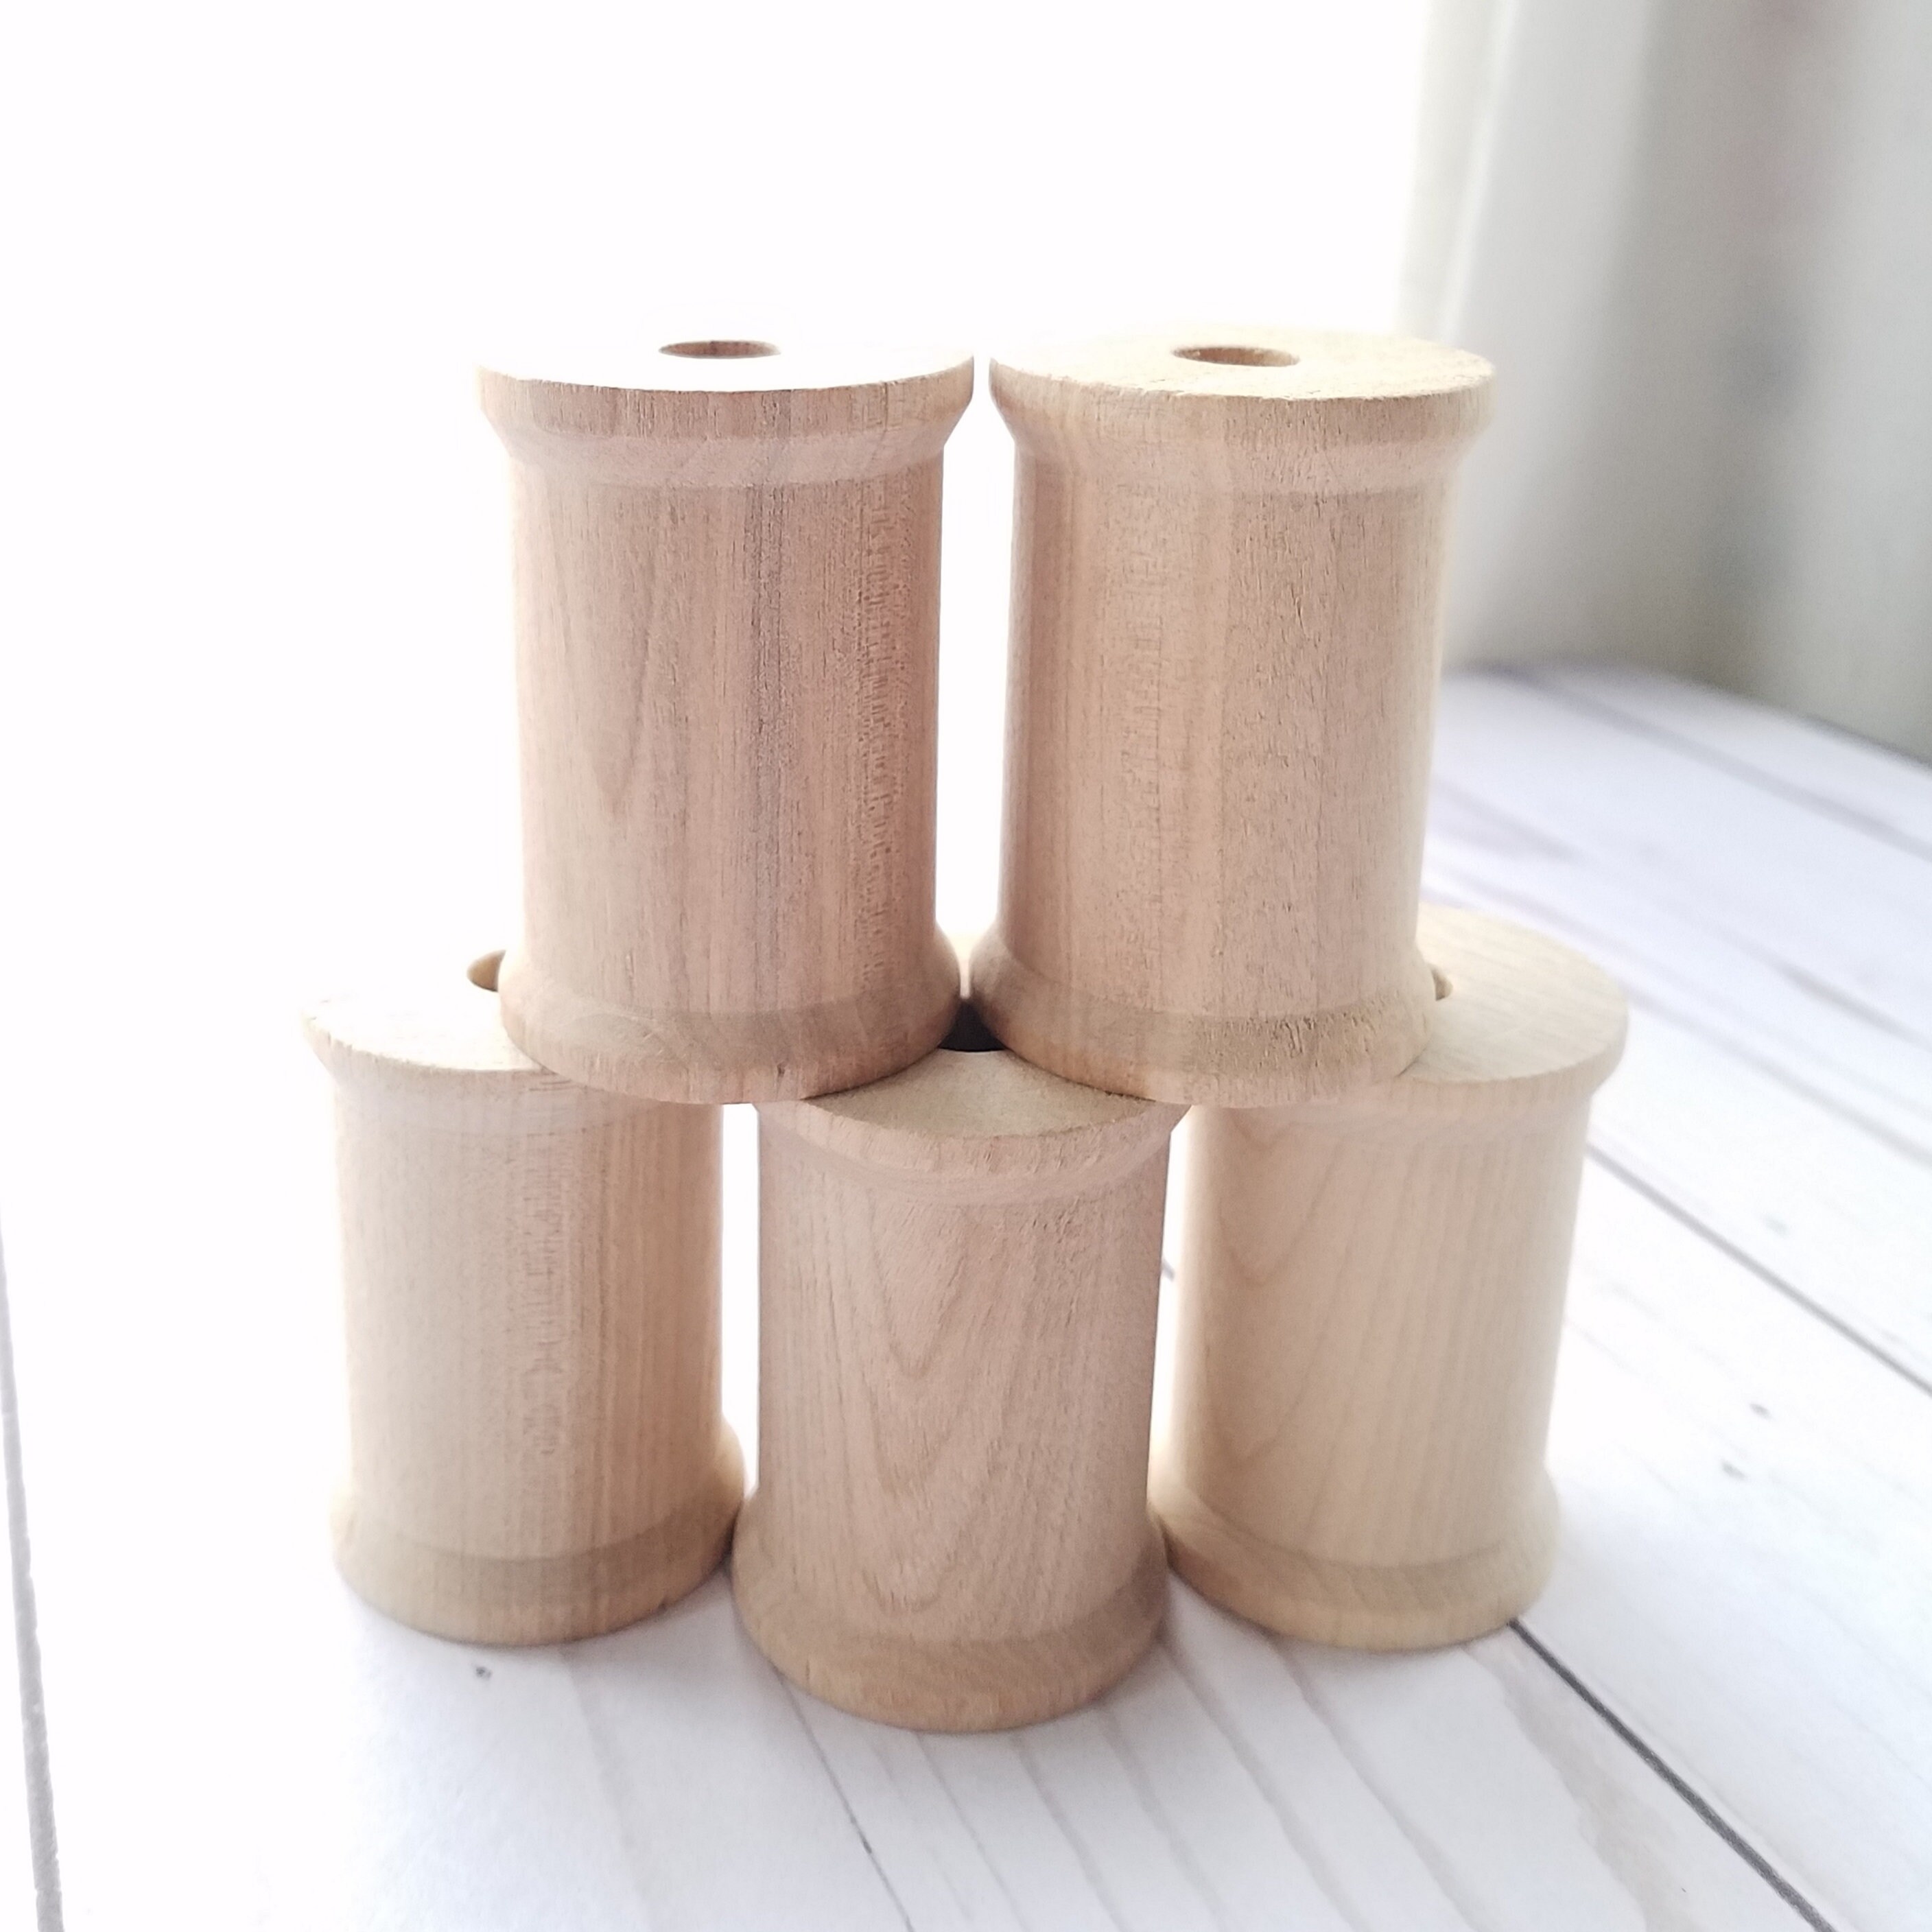 #9000 our largest Set of 5 blank Wood Spools made in USA 2 1/8" x 1 1/2" 